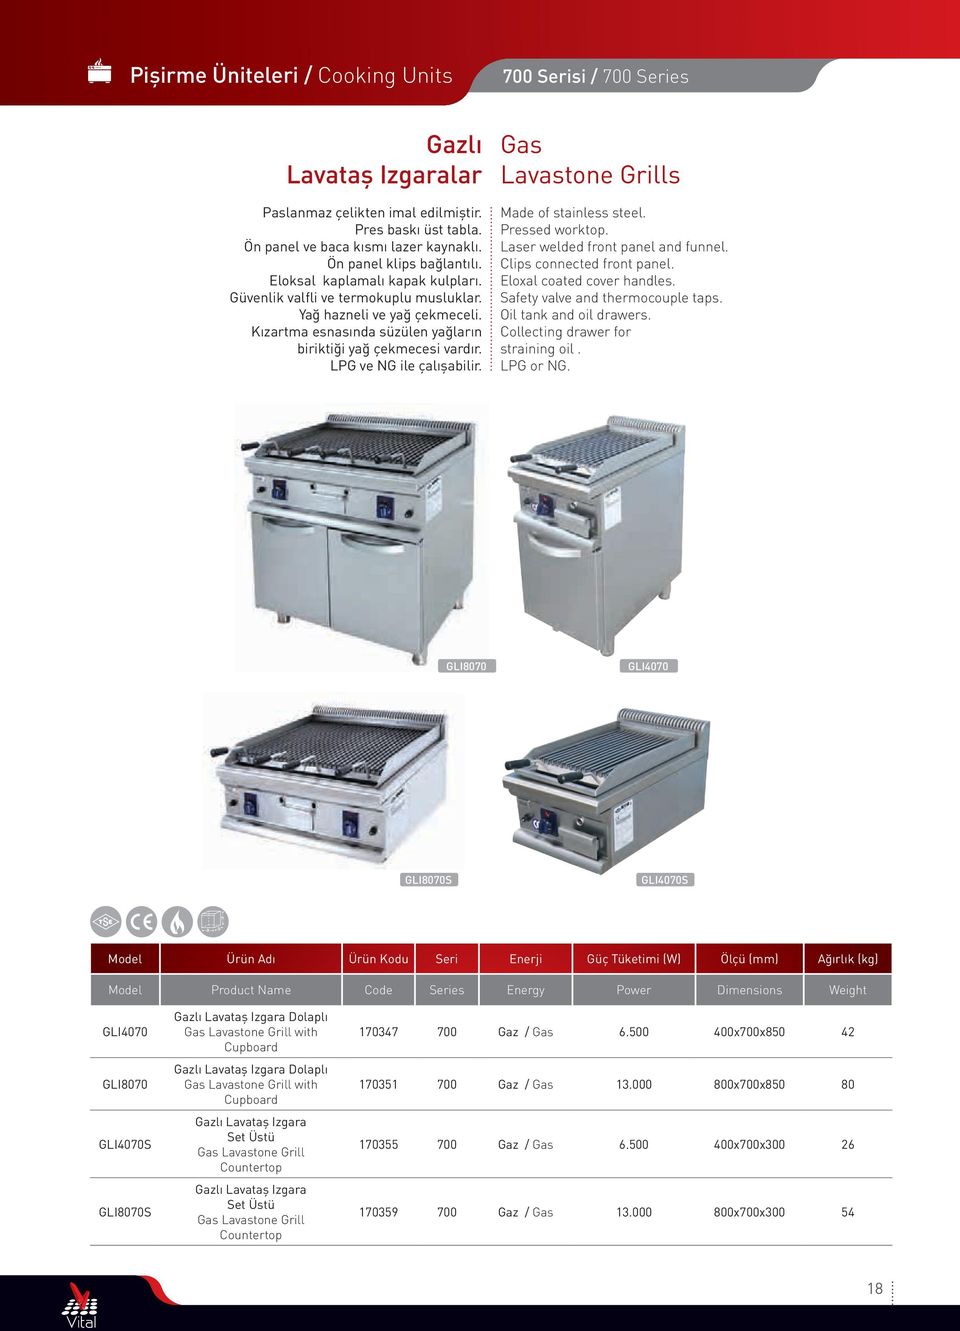 Gas Lavastone Grills Pressed worktop. Laser welded front panel and funnel. Clips connected front panel. Eloxal coated cover handles. Safety valve and thermocouple taps. Oil tank and oil drawers.